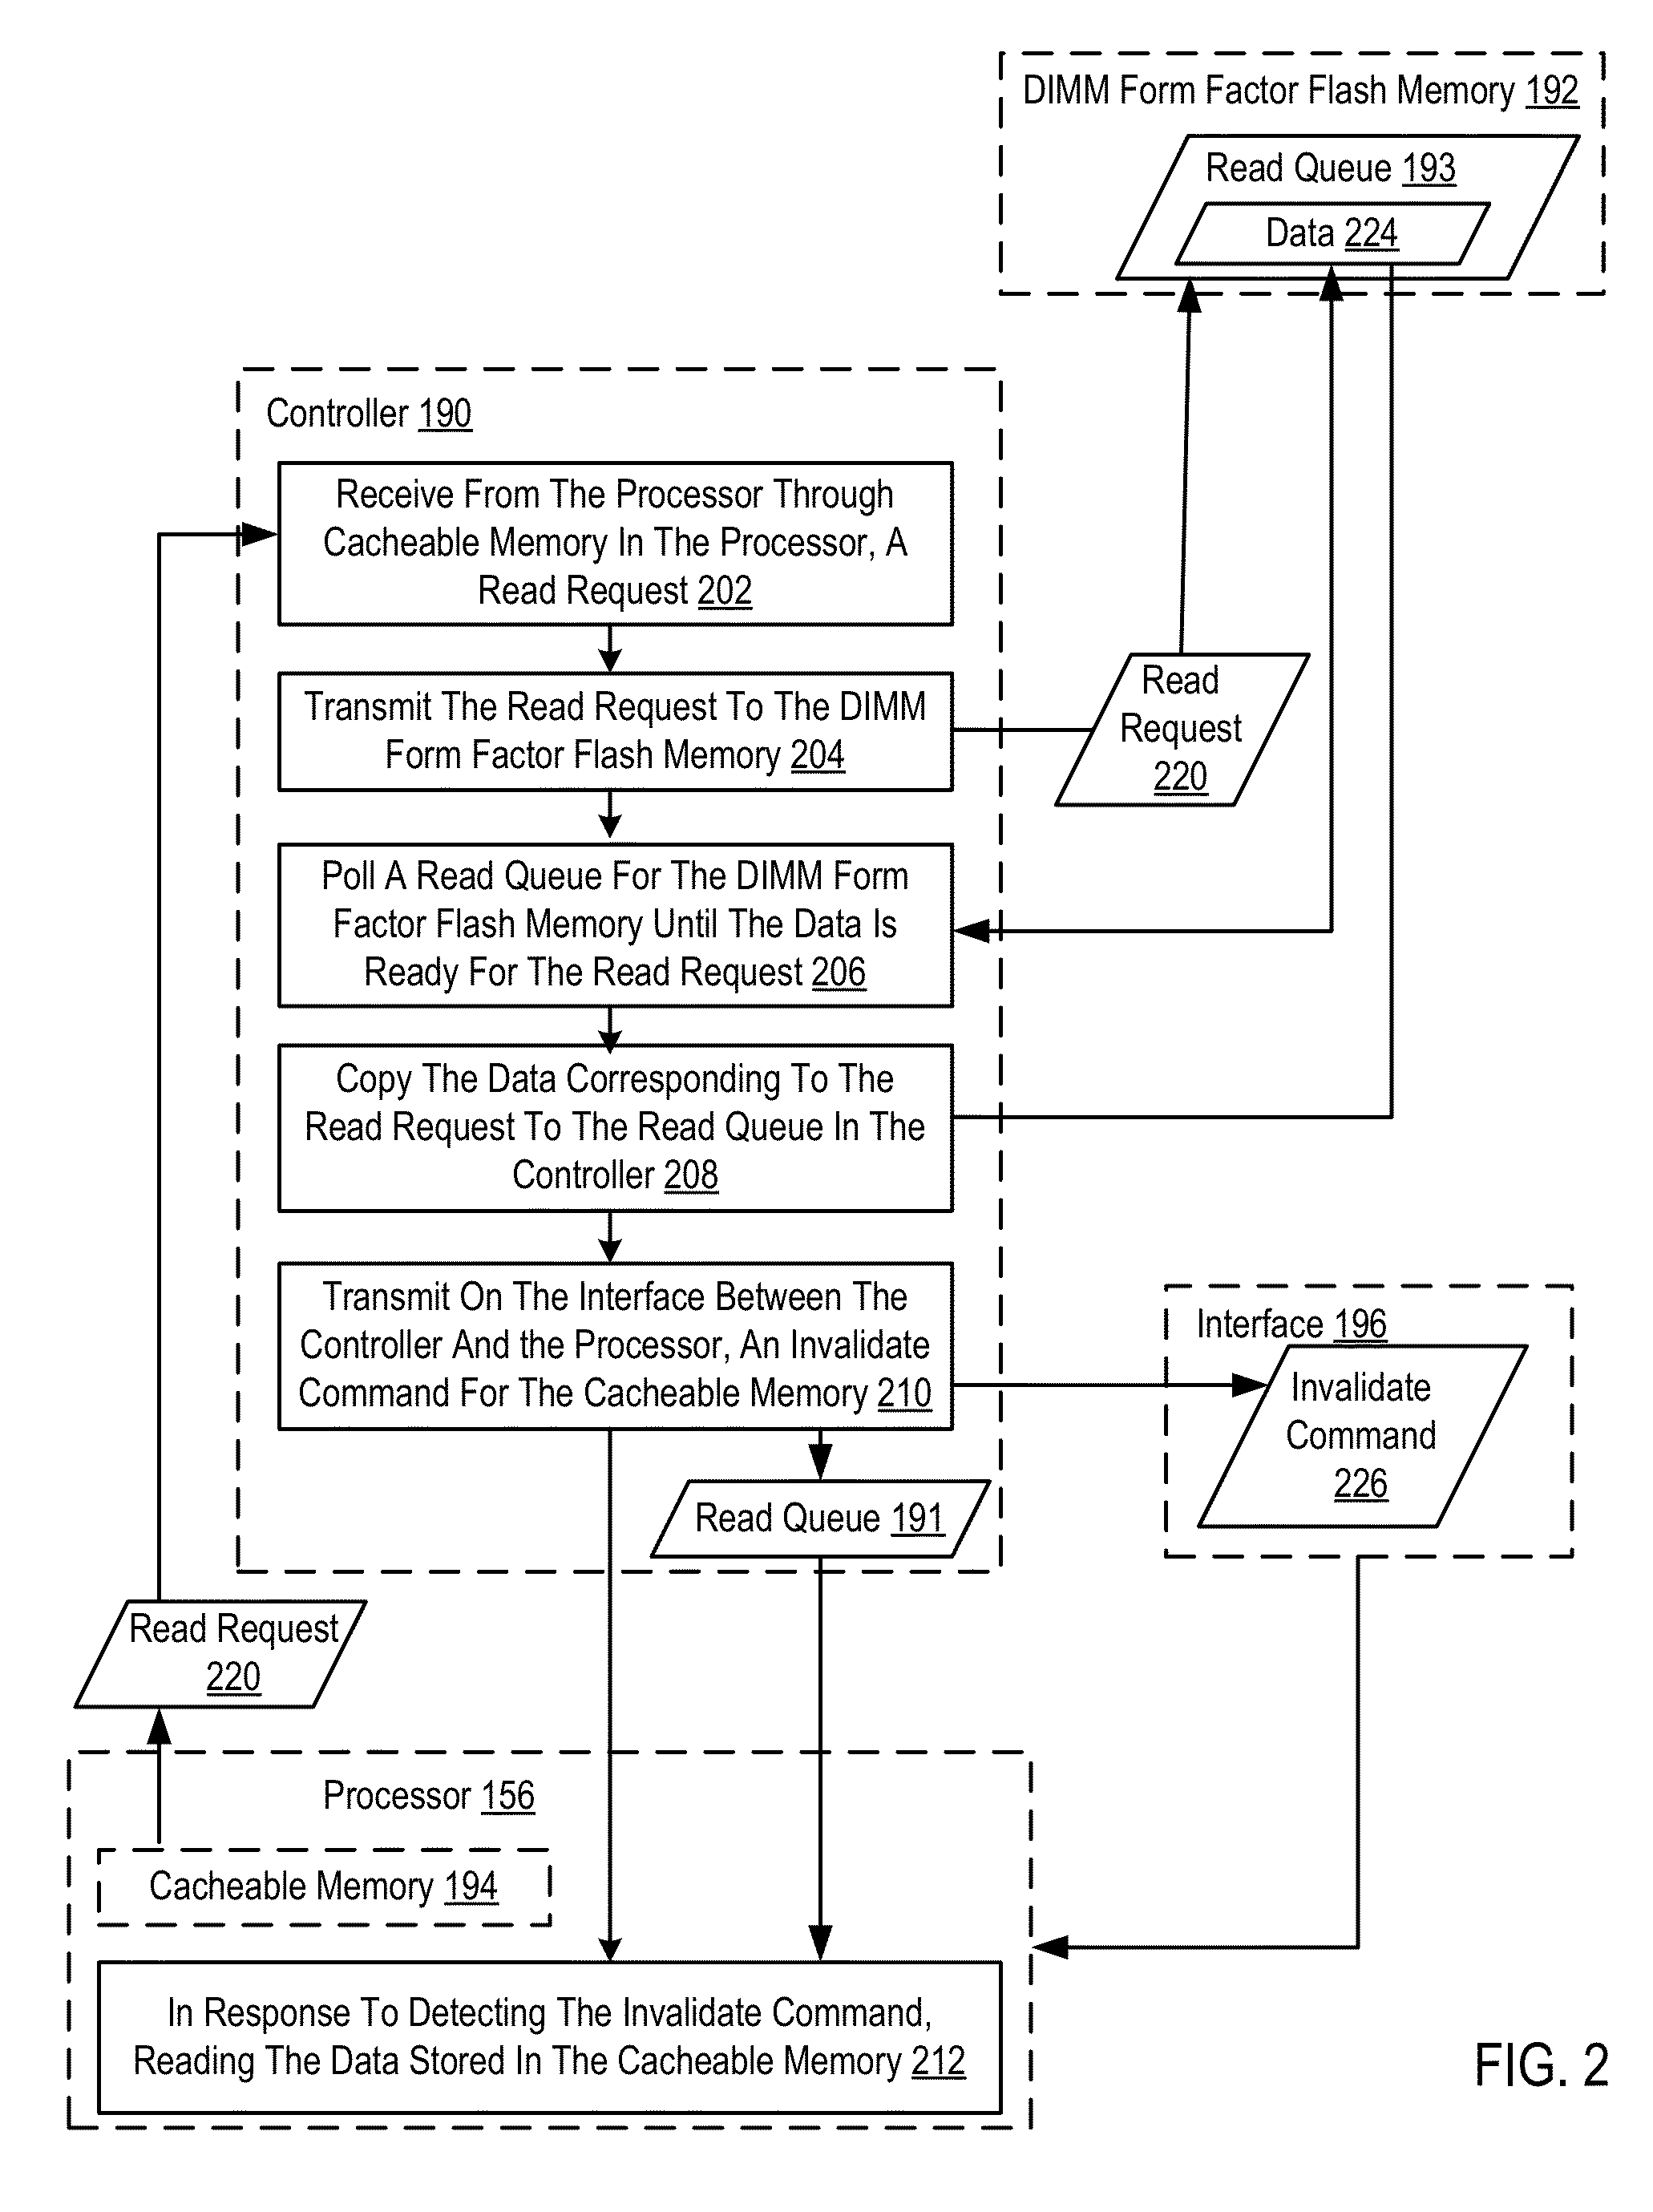 Memory access to a dual in-line memory module form factor flash memory